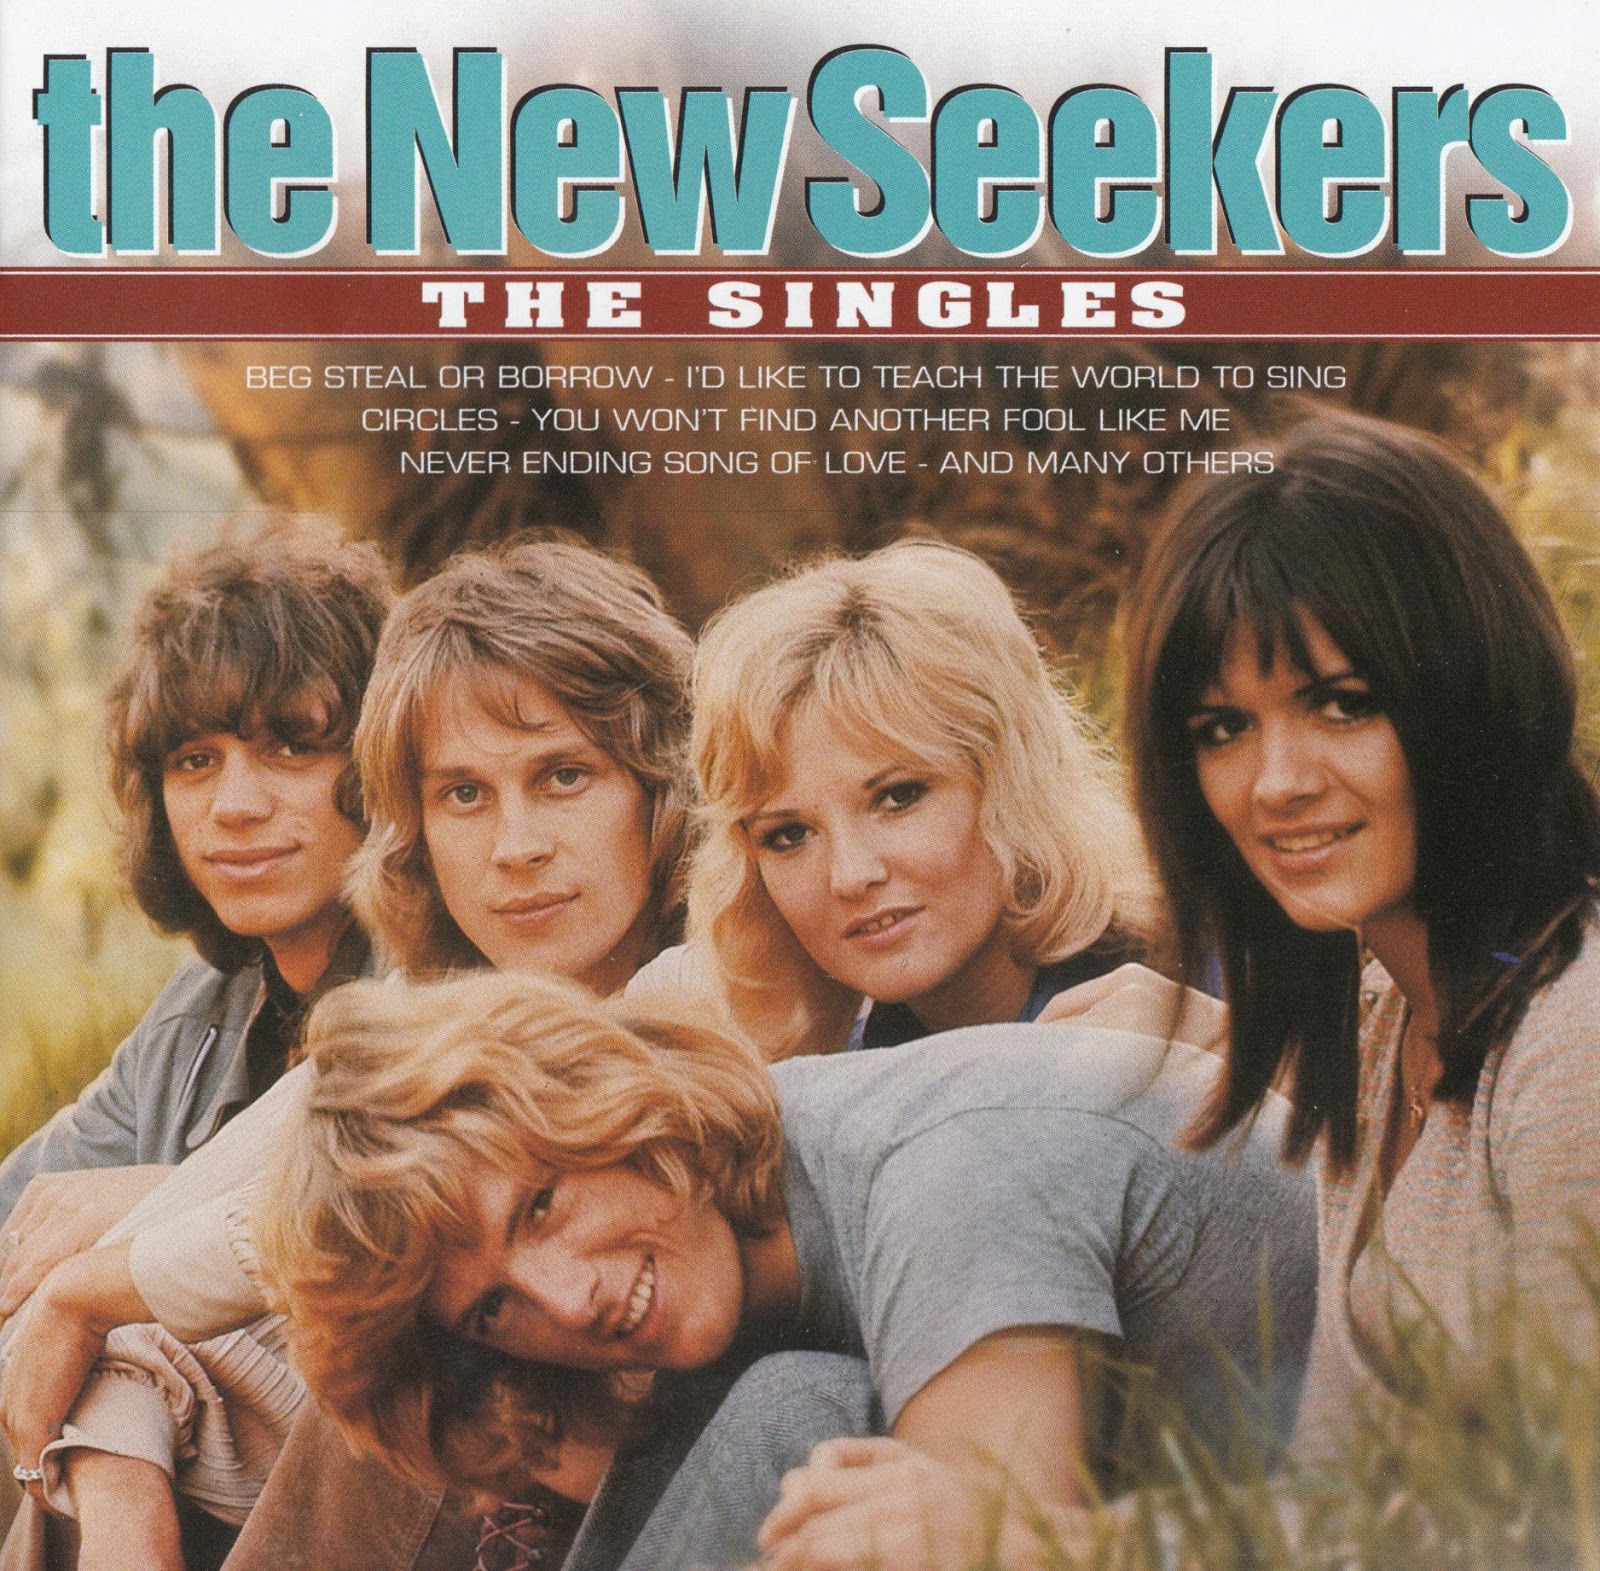 Uk singles. Группа the Seekers. The New Seekers the Singles. The New Seekers the Singles CD. The New Seekers collection album.